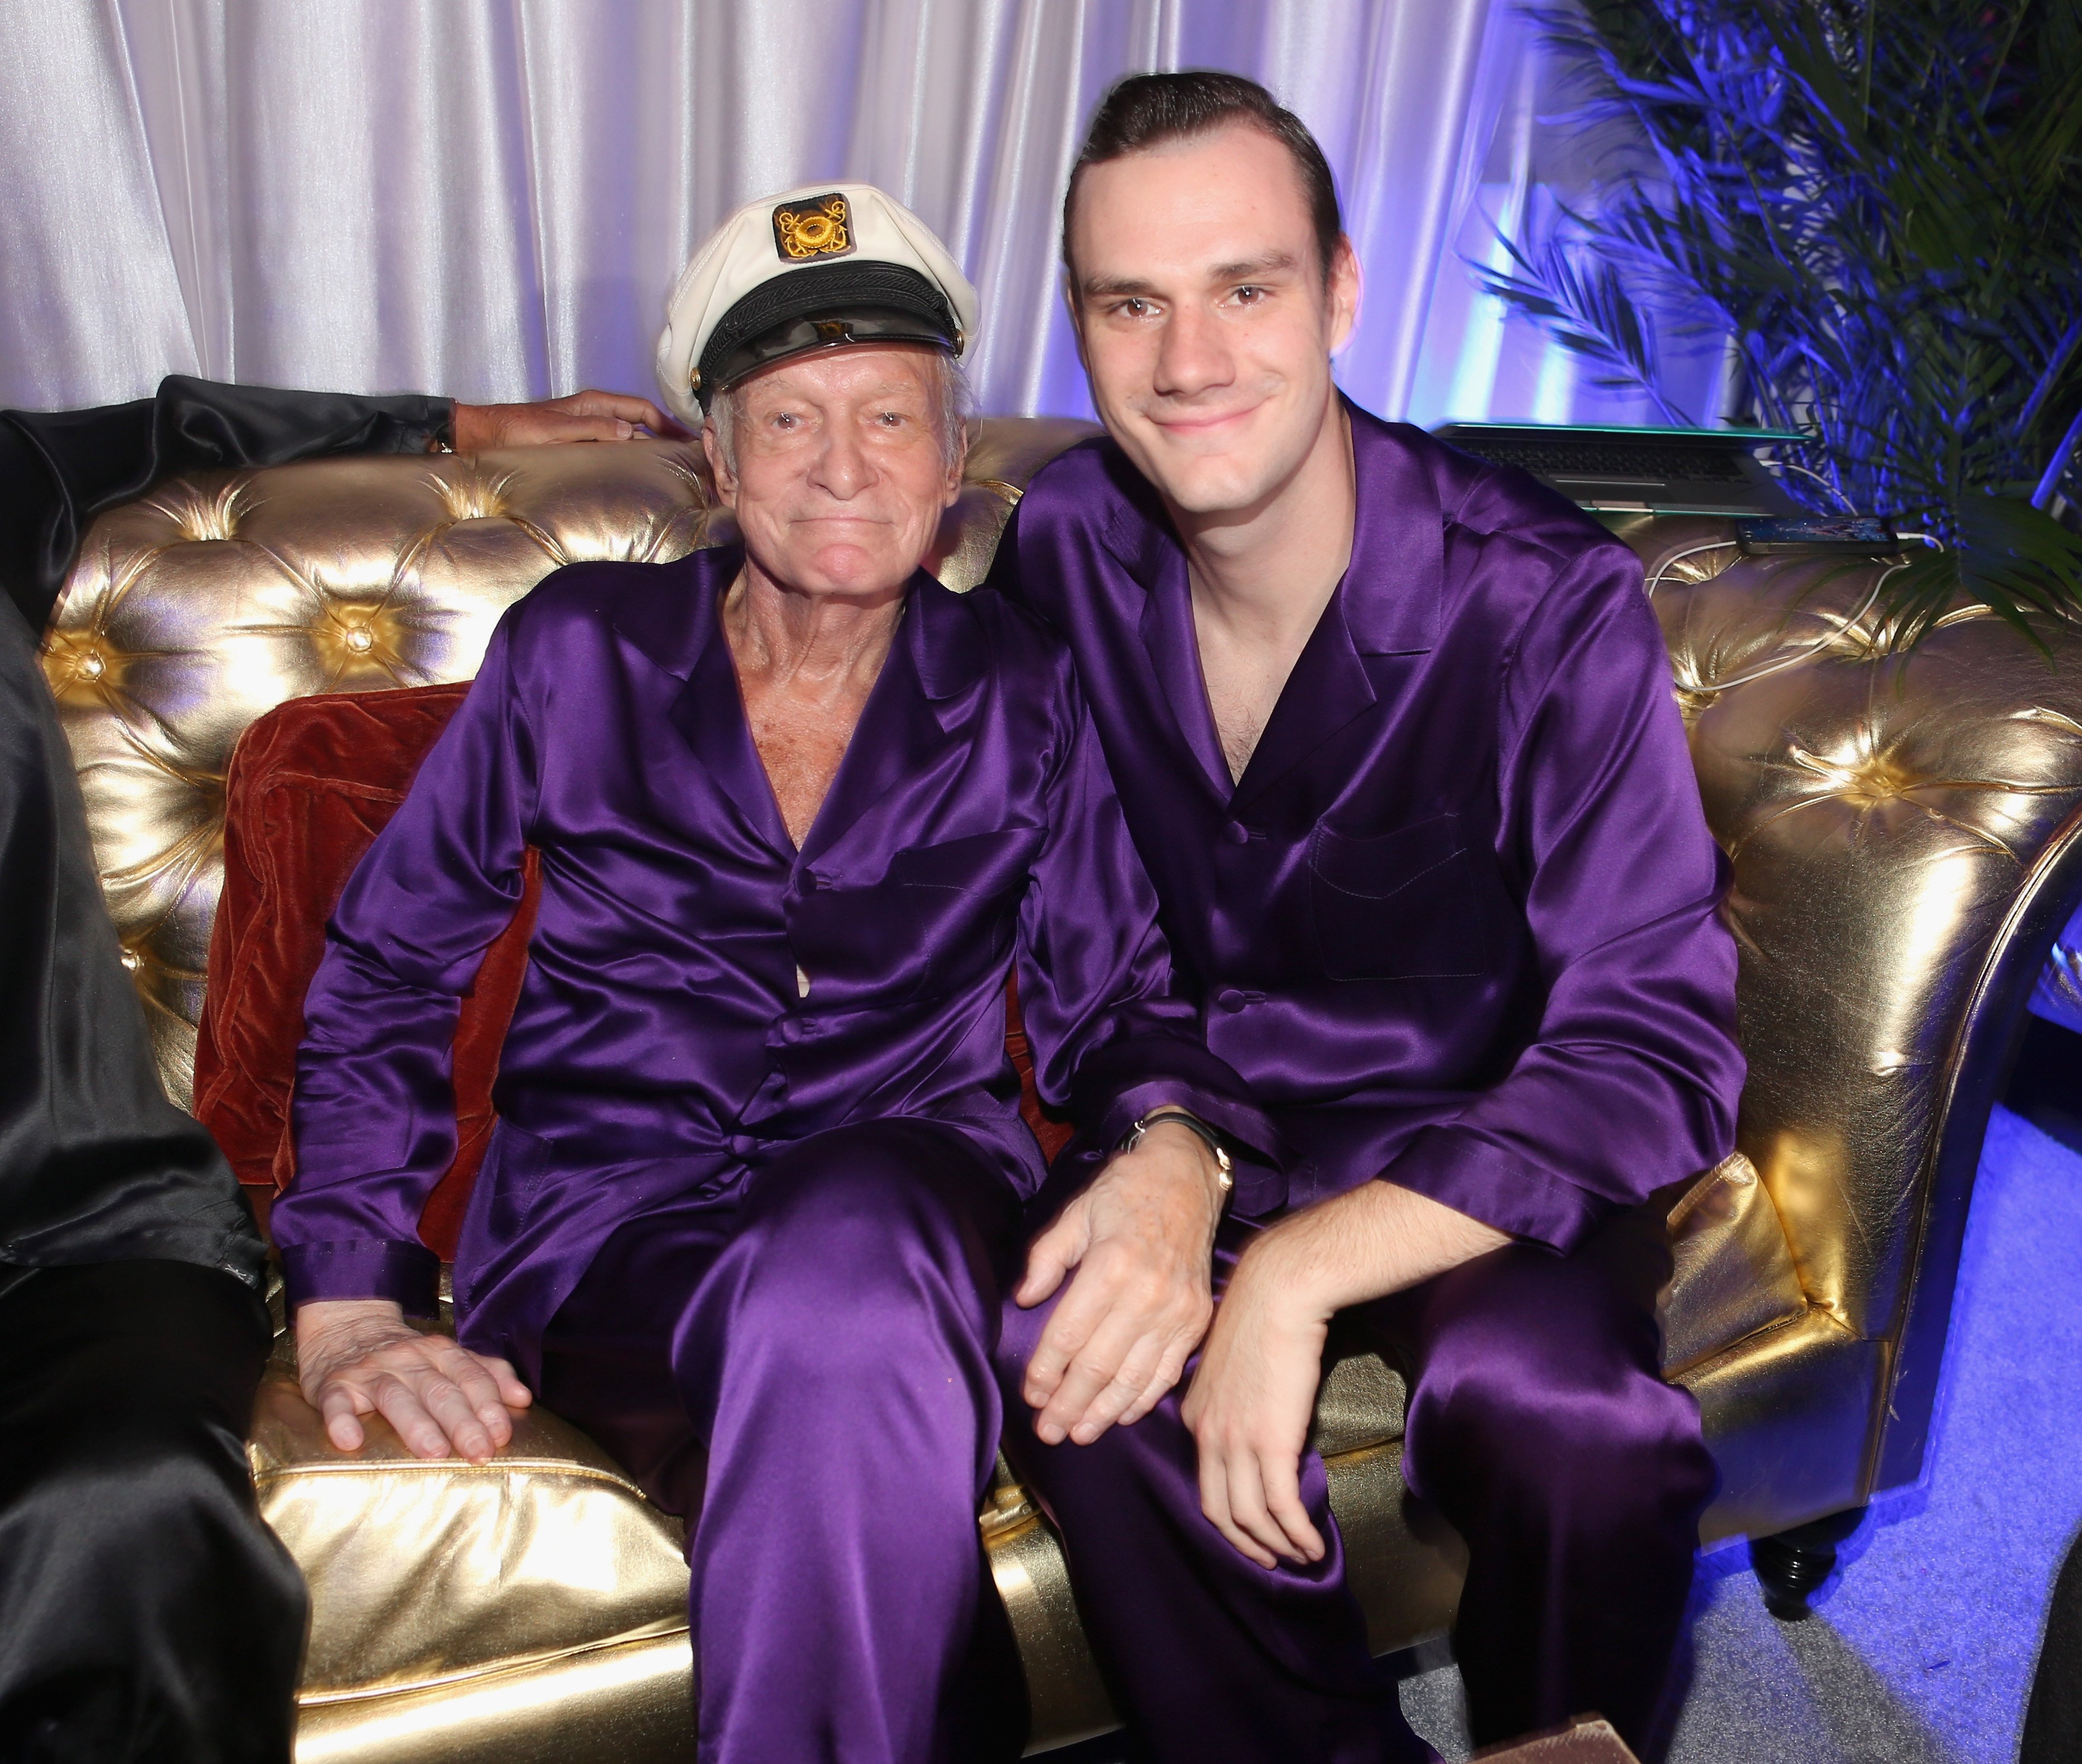 Hugh Hefner and his son Cooper Hefner attend the Annual Midsummer Night's Dream Party at the Playboy Mansion on August 16, 2014, in Holmby Hills, California. | Source: Getty Images